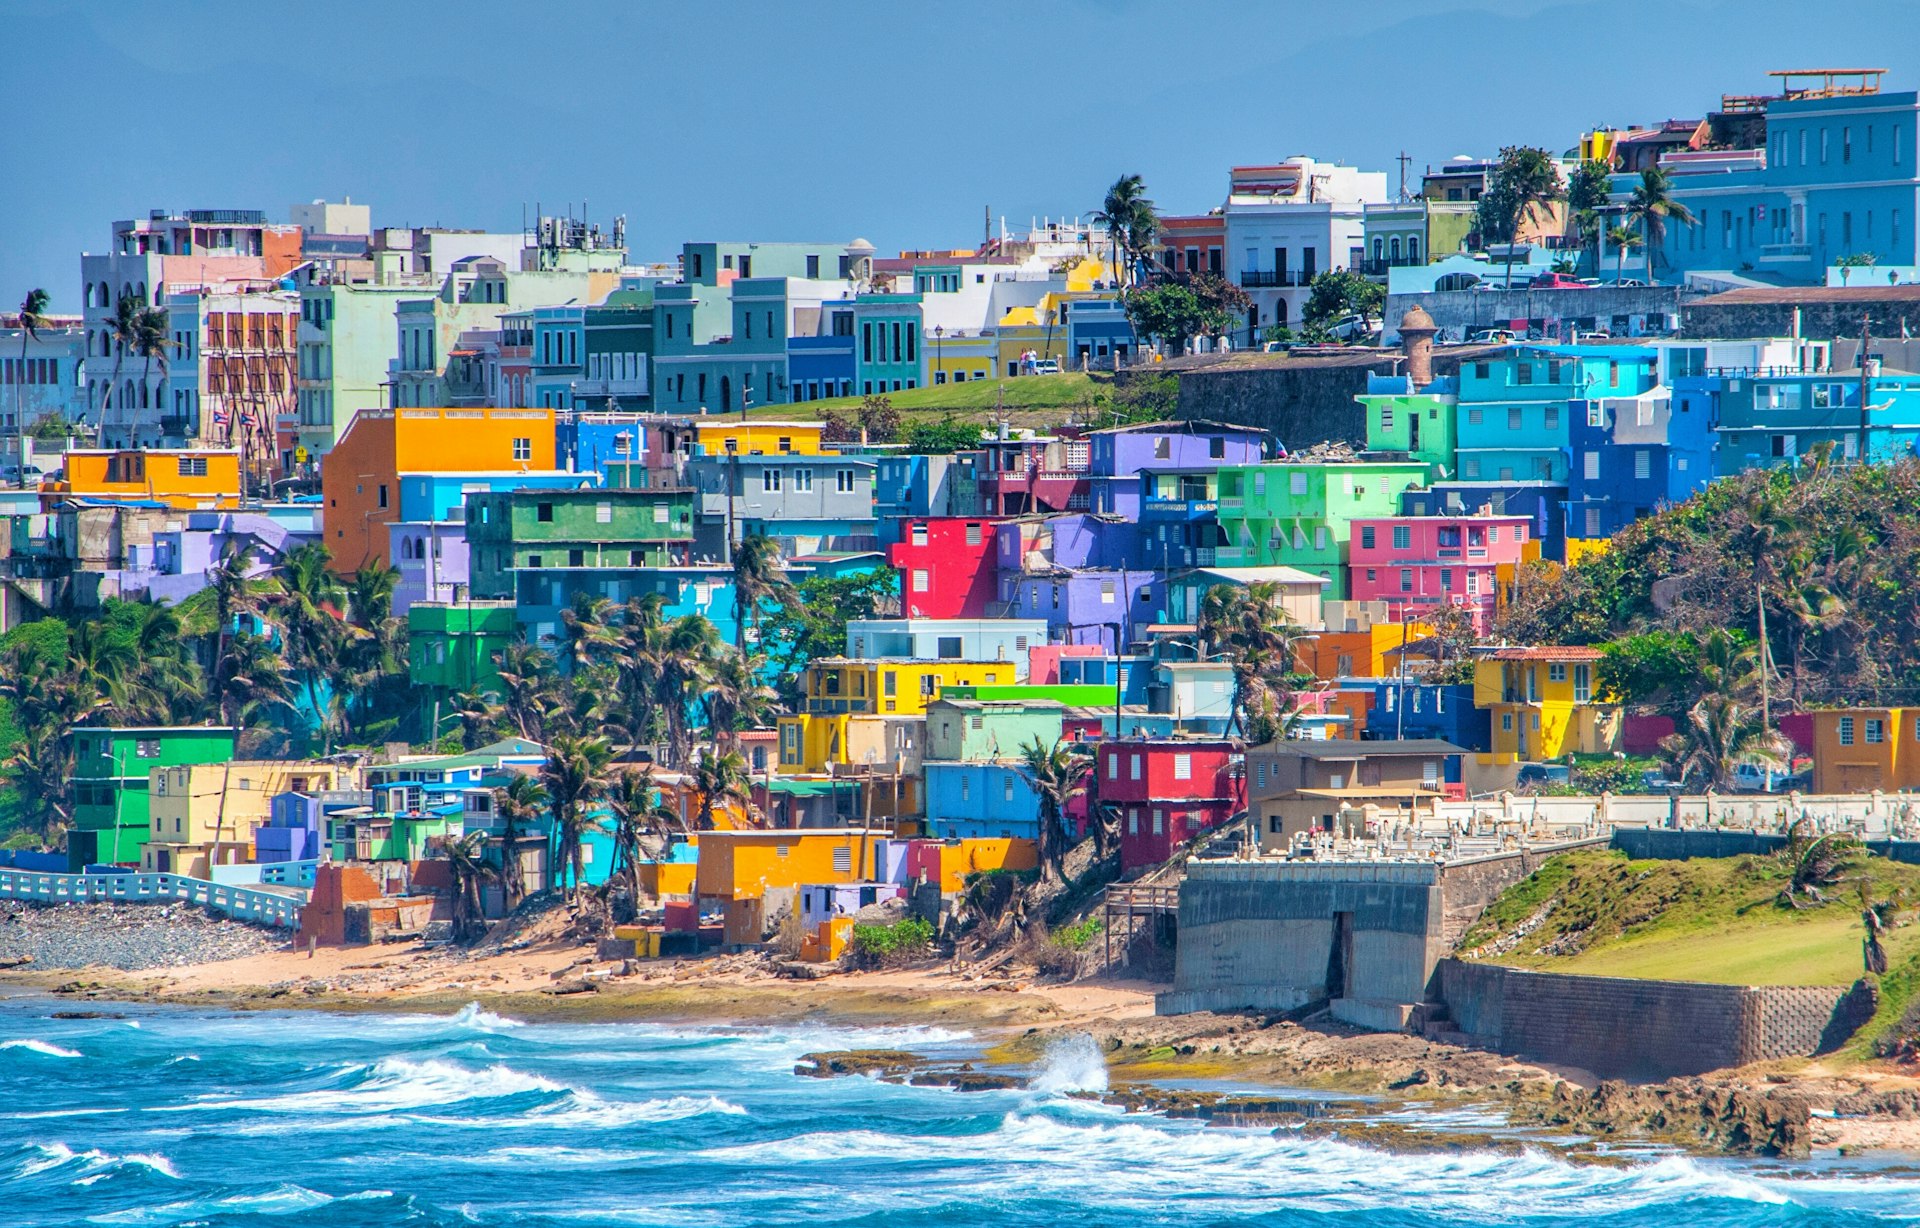 Colourful buildings by the sea in San Juan, Puerto Rico